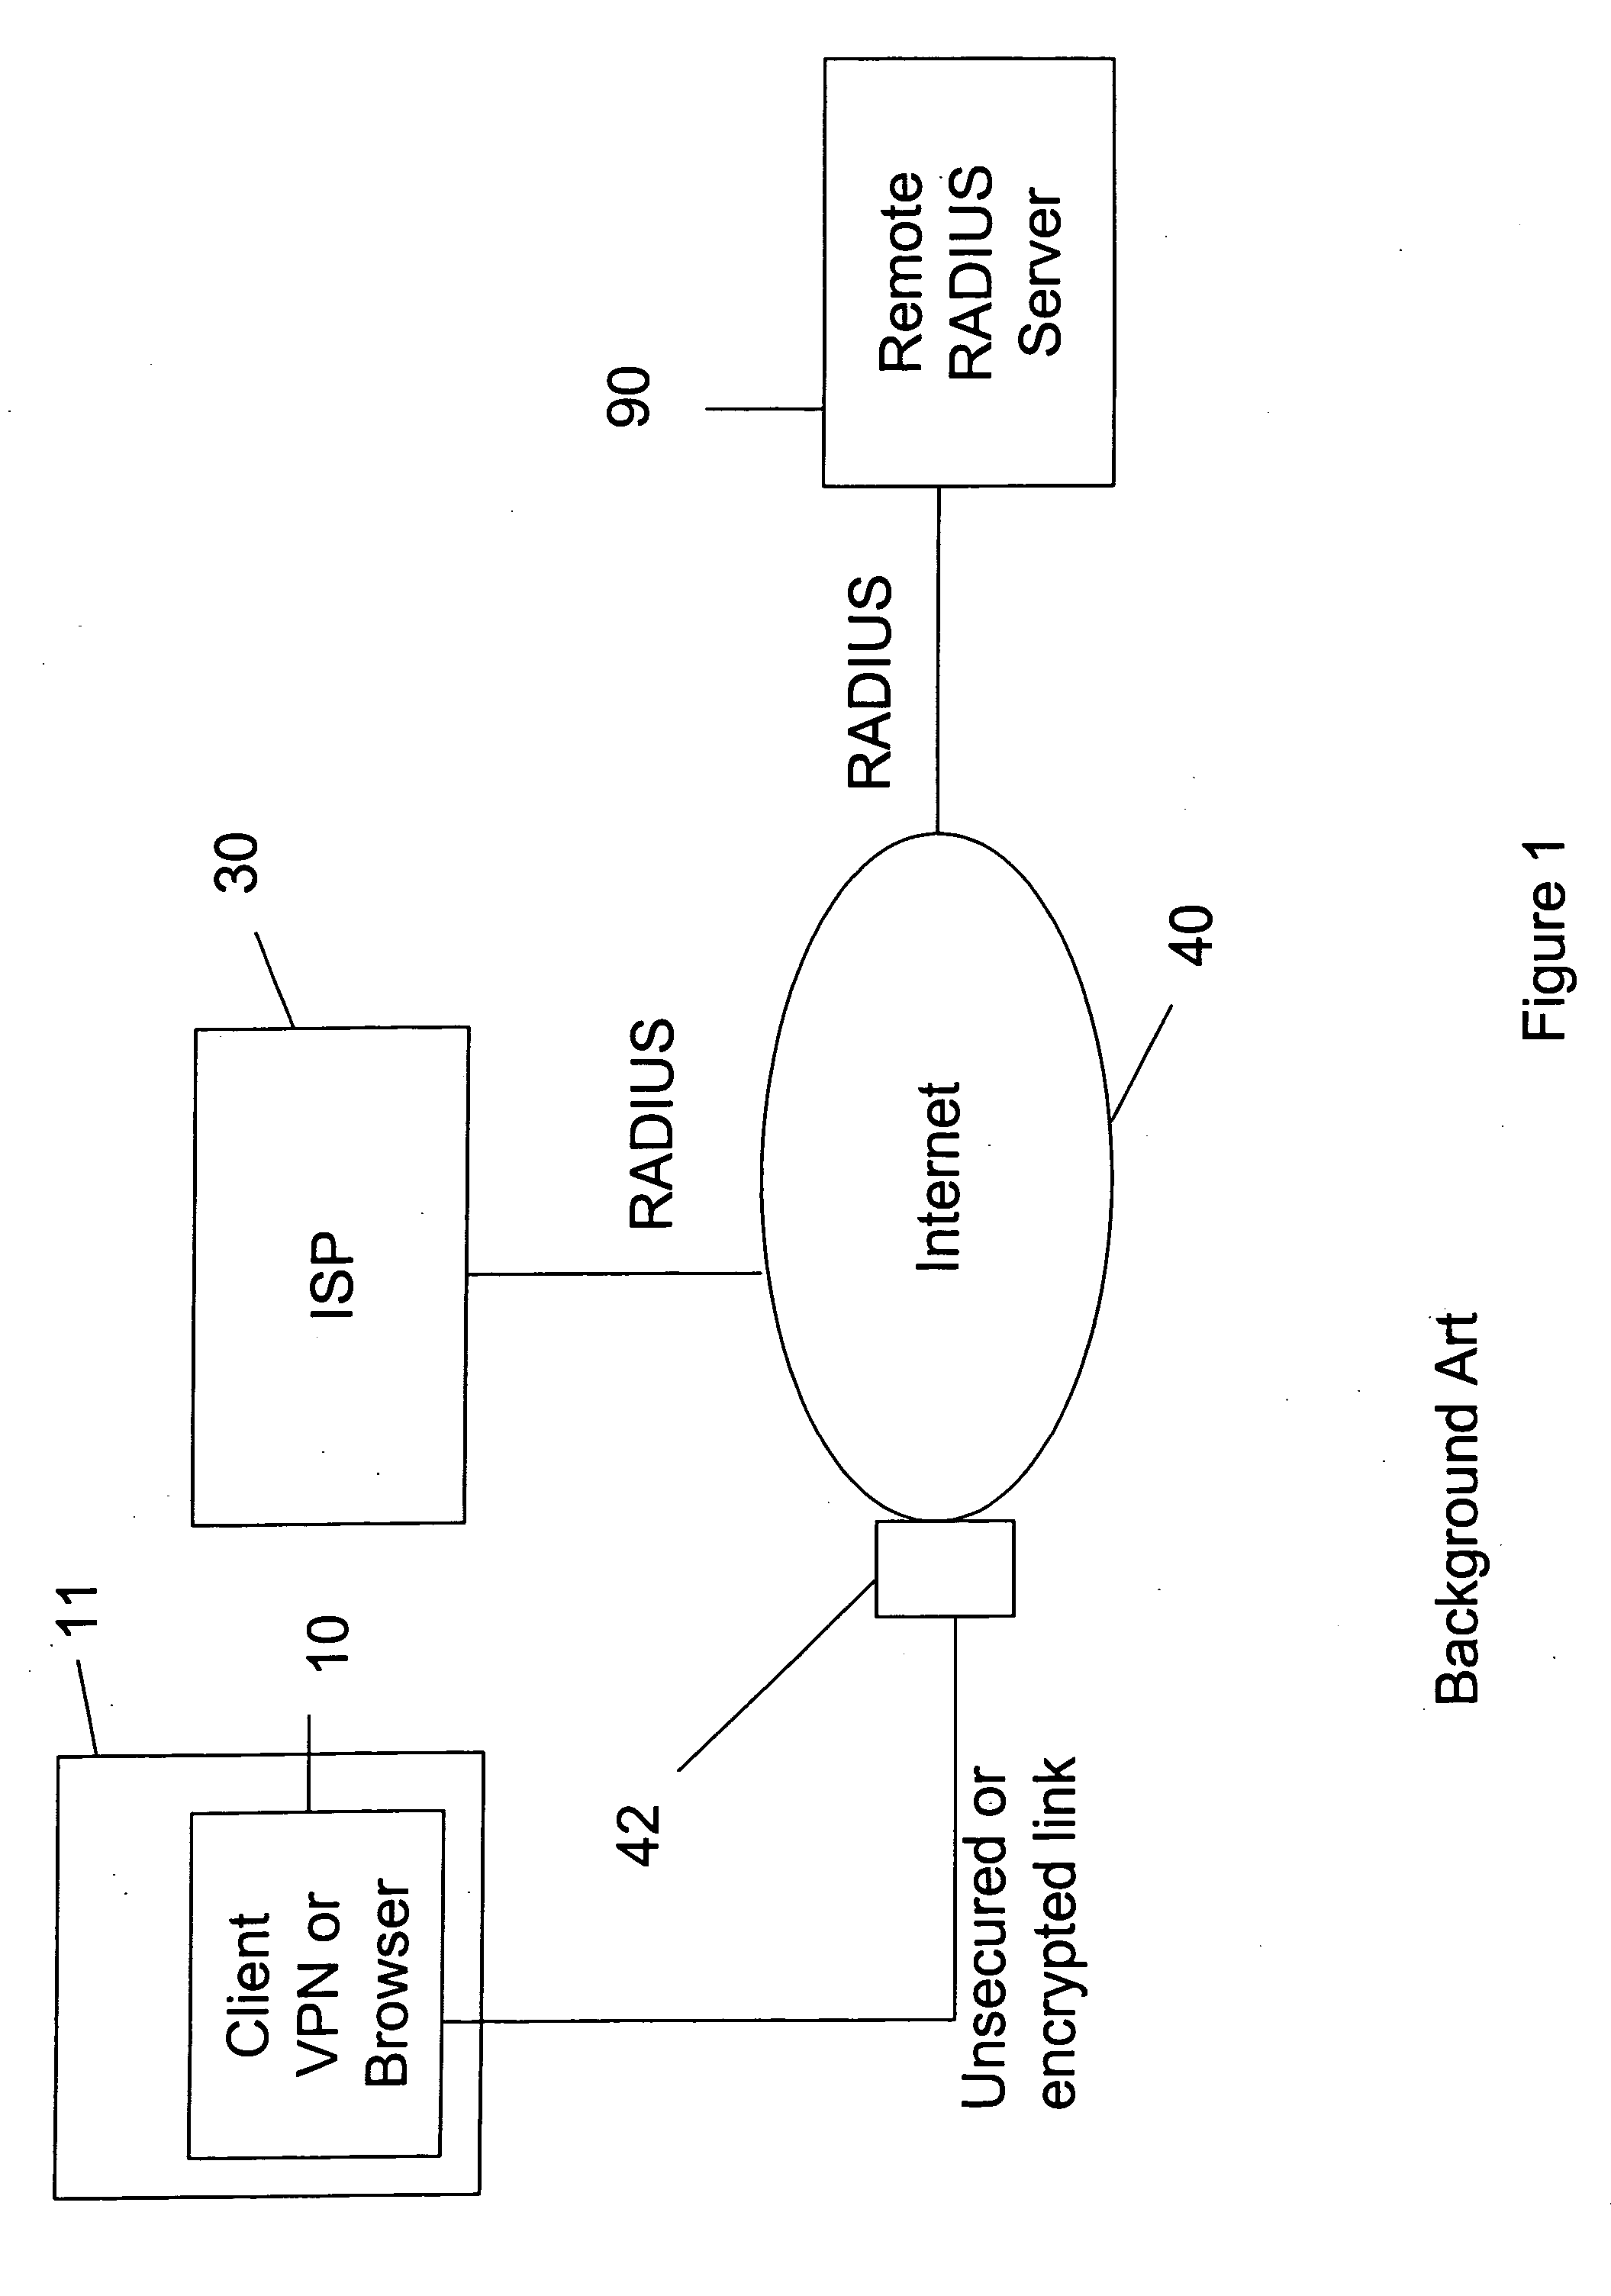 System, method, apparatus and computer program product for facilitating digital communications